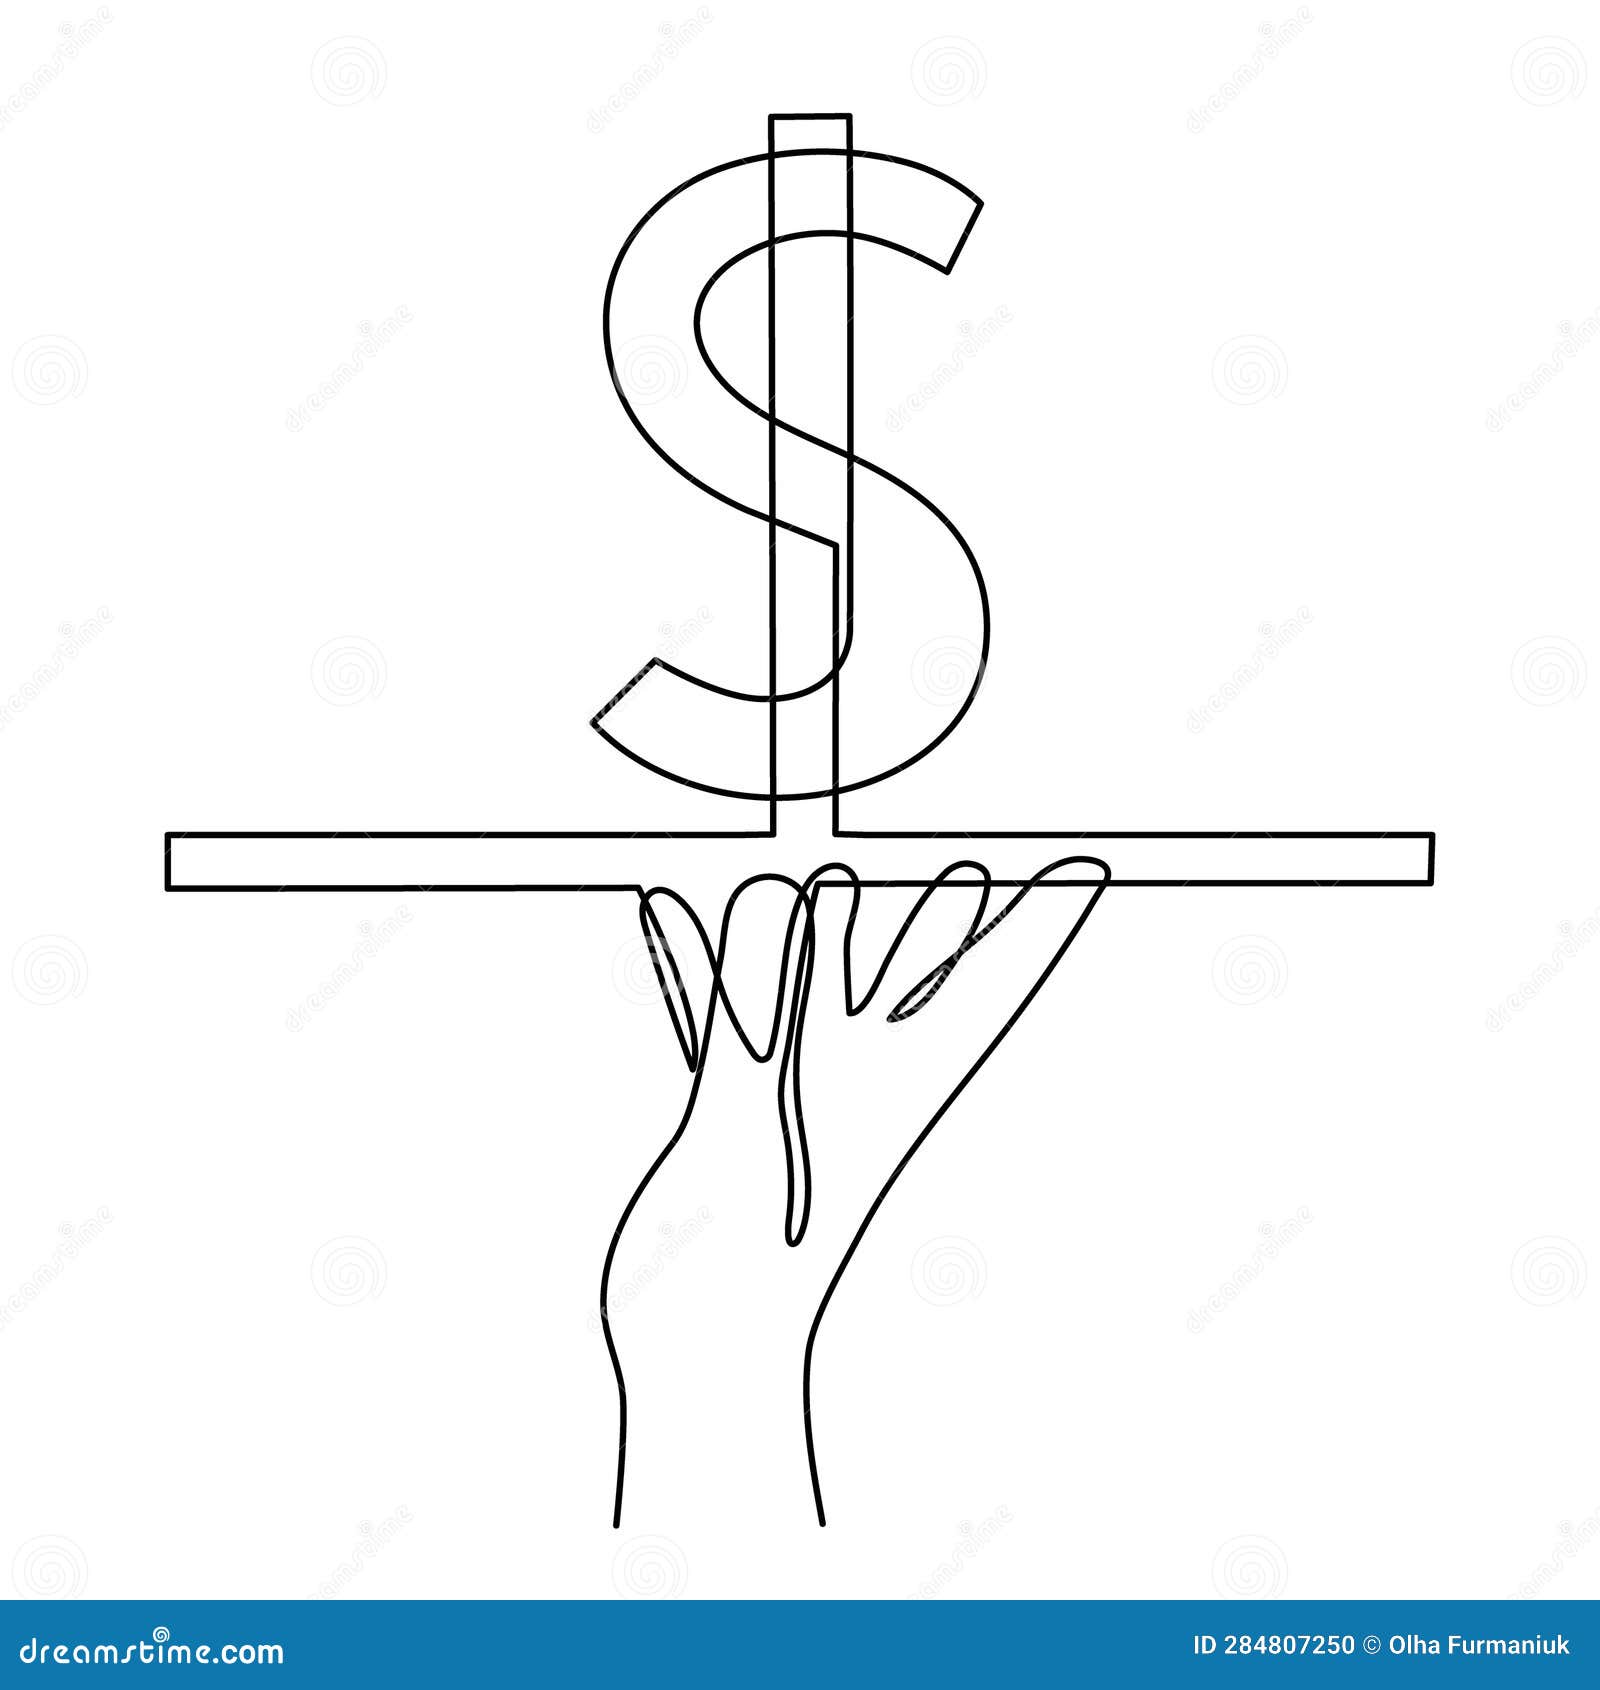 hand holds dollar sign on tray,one line art,continuous contour drawing, hand-drawn line icon for business.financial valuta sign,